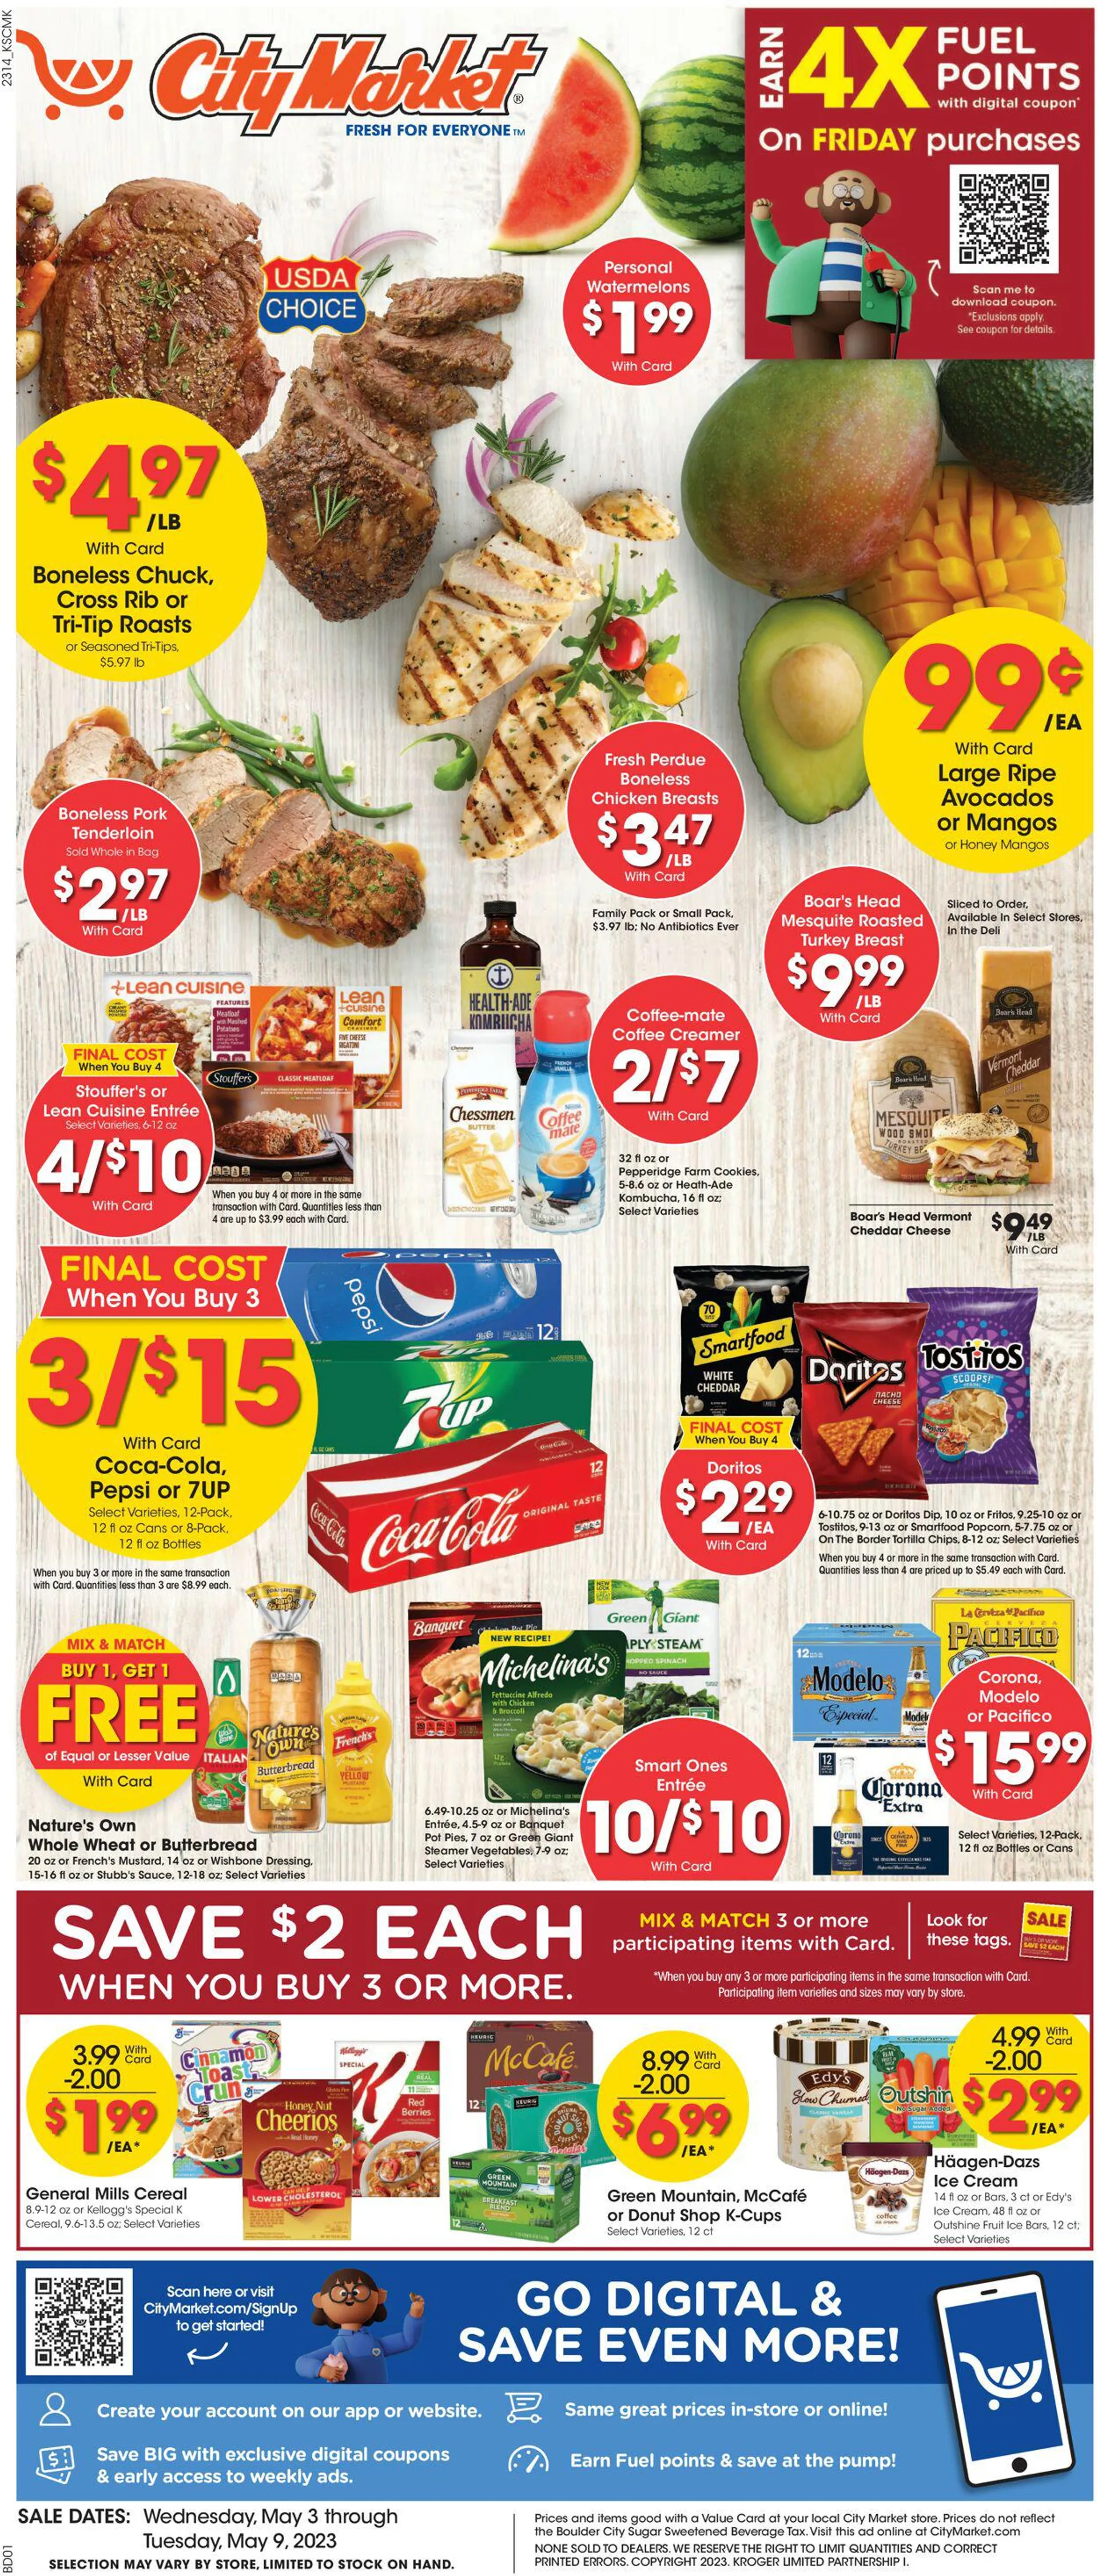 City Market Current weekly ad - 1